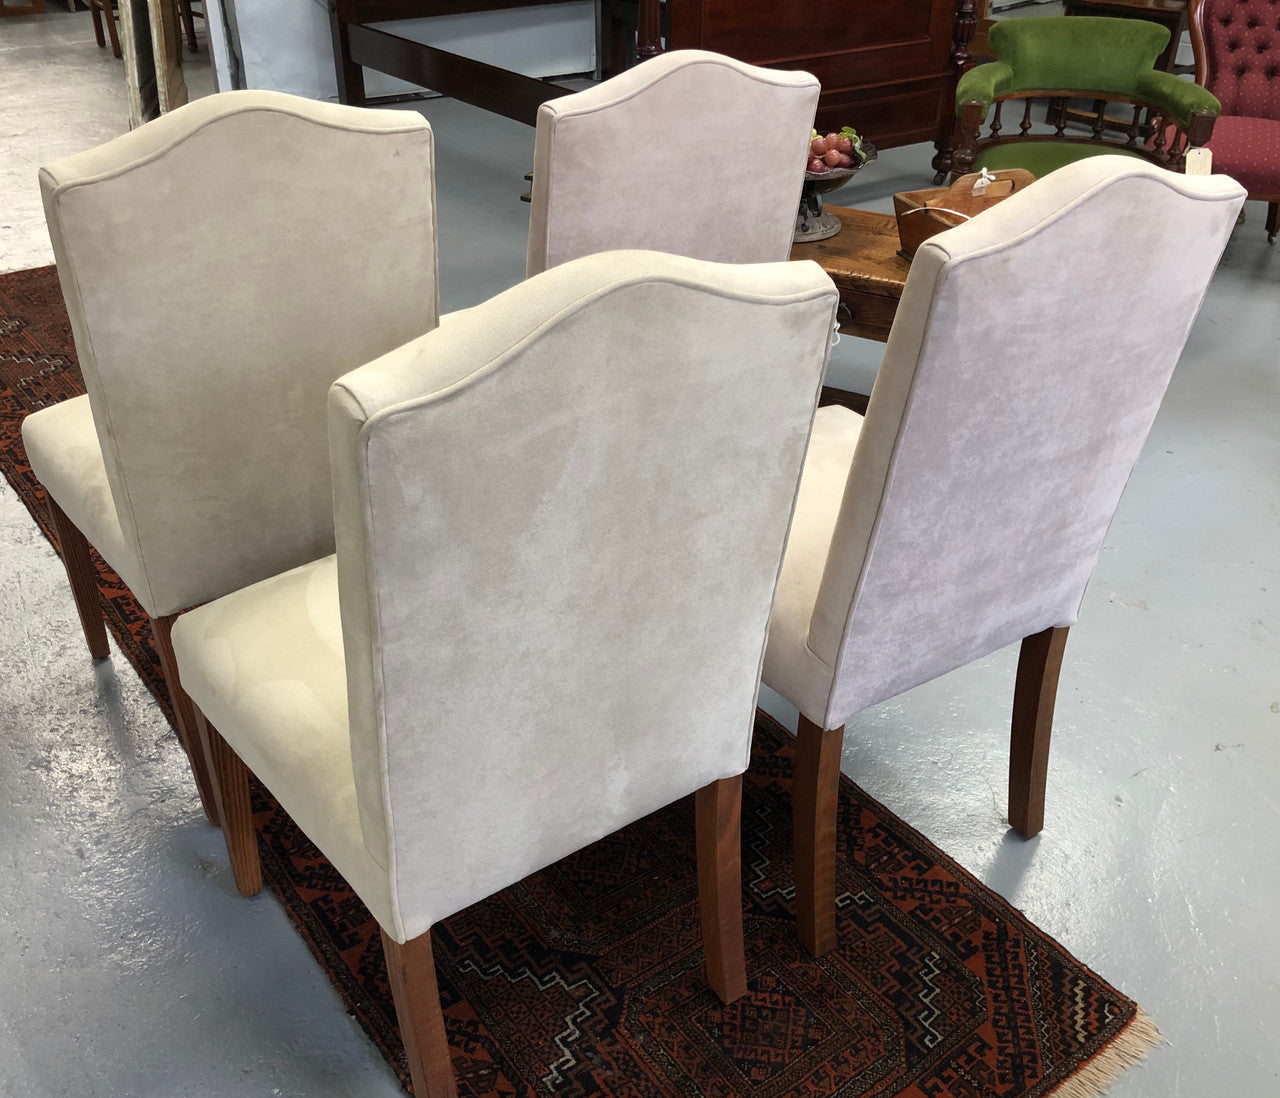 Beautiful set of four upholstered taupe/ light fawn dining chairs which are very comfortable to sit in. They are in good original condition.